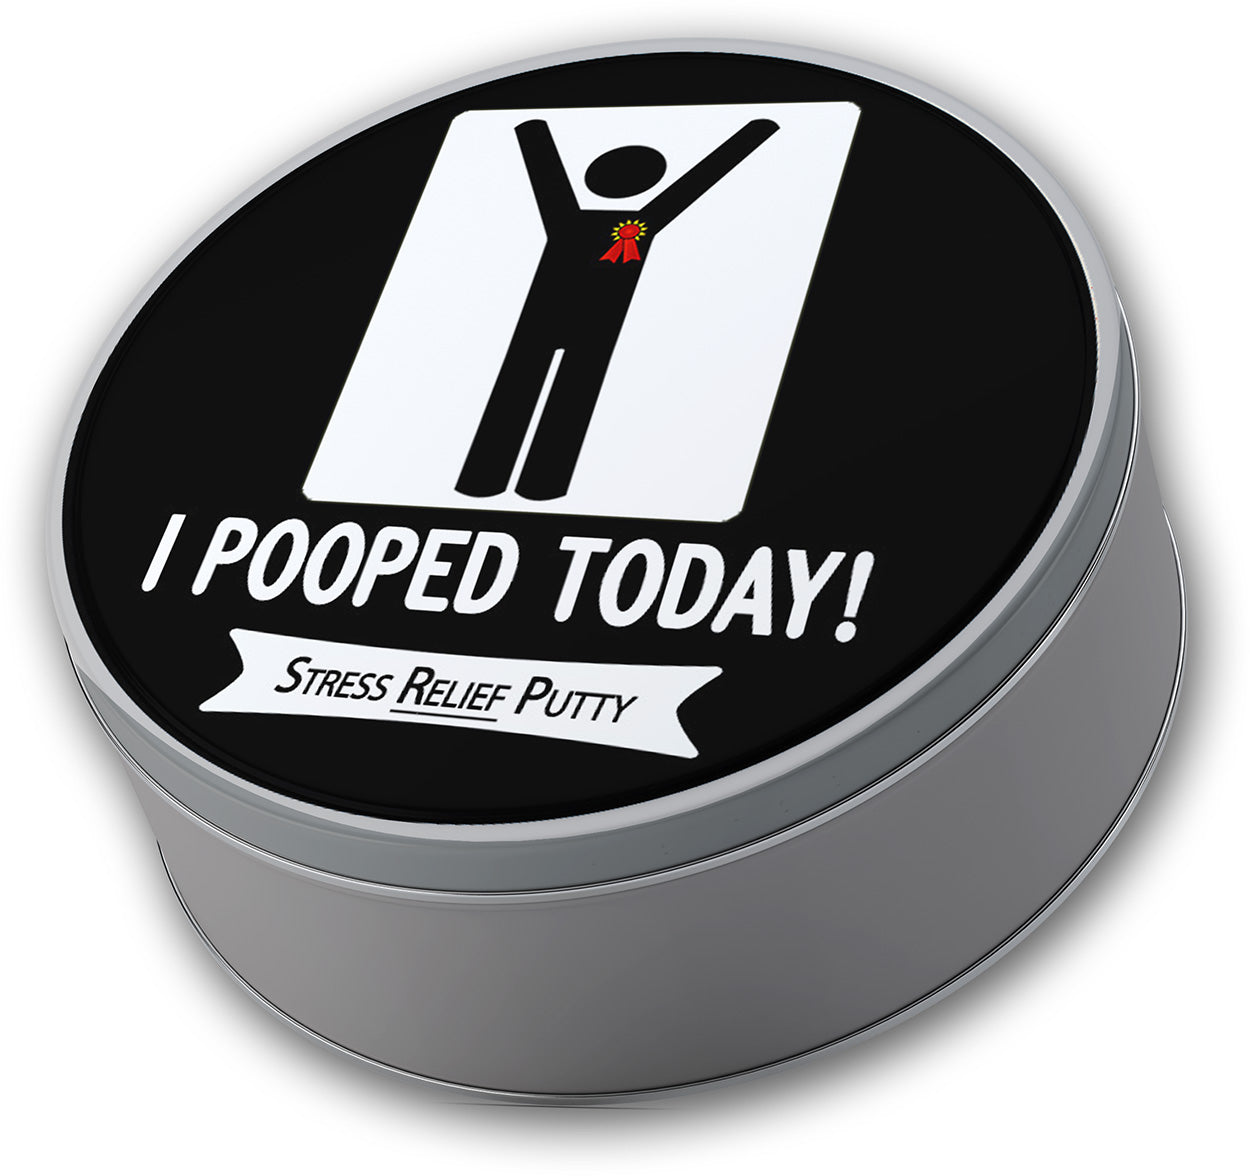 I Pooped Today Stress Relief Putty